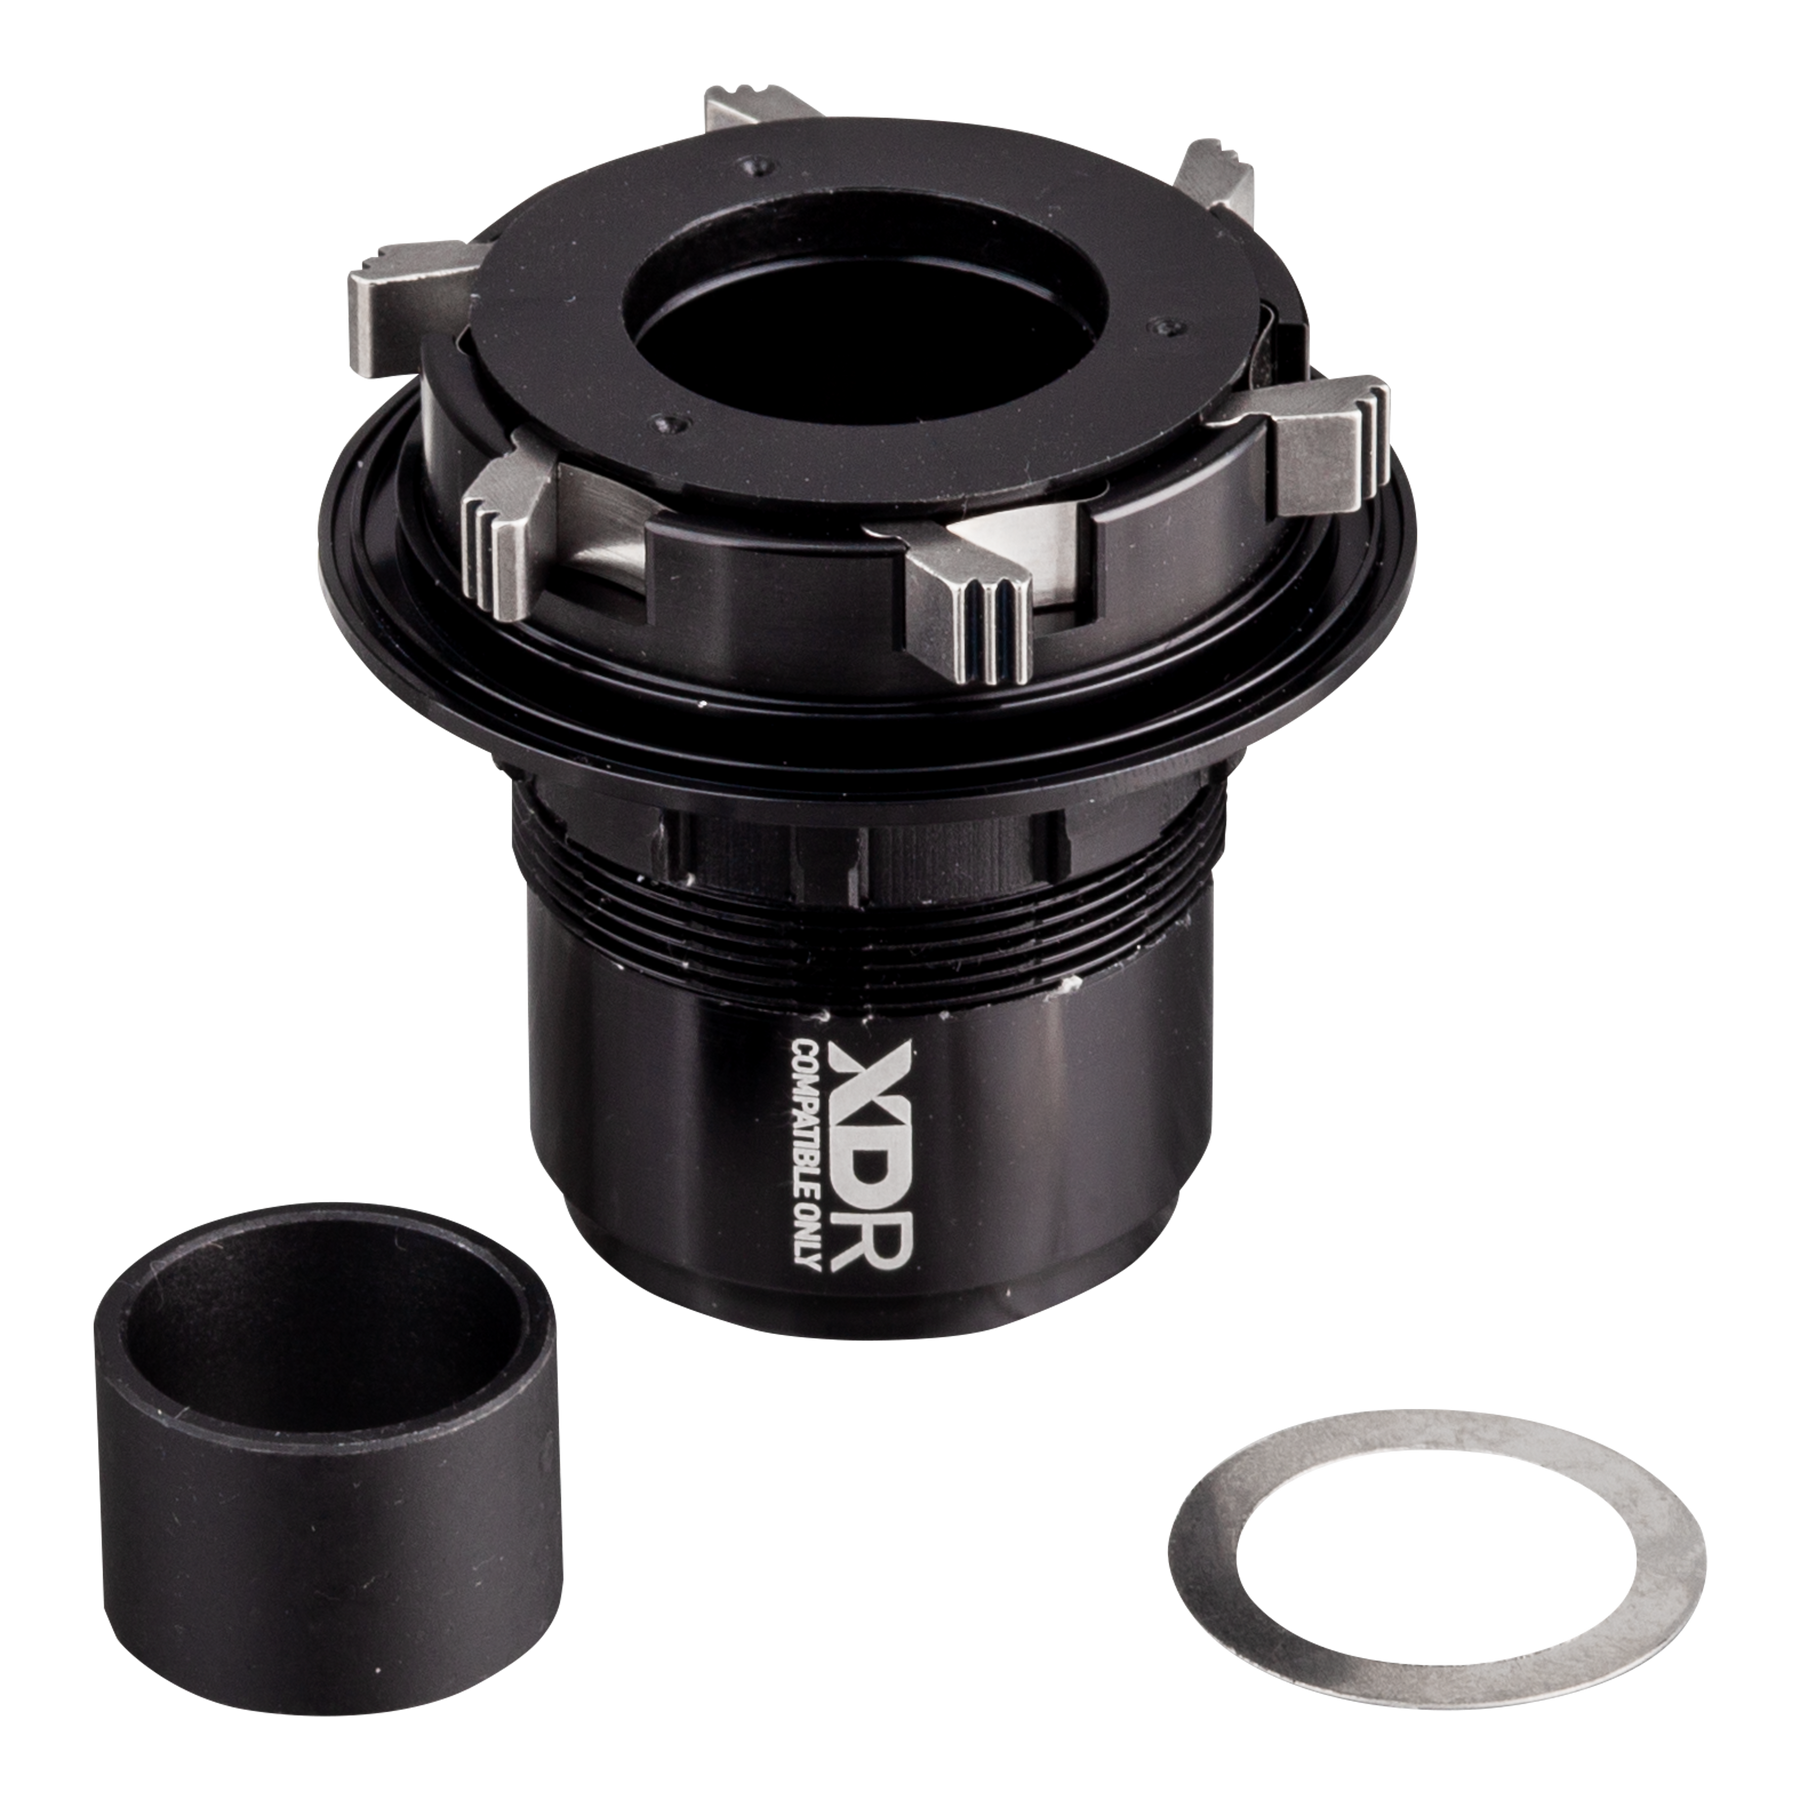 Hex Drive XD / XDR Freehub Bodies The Gravity